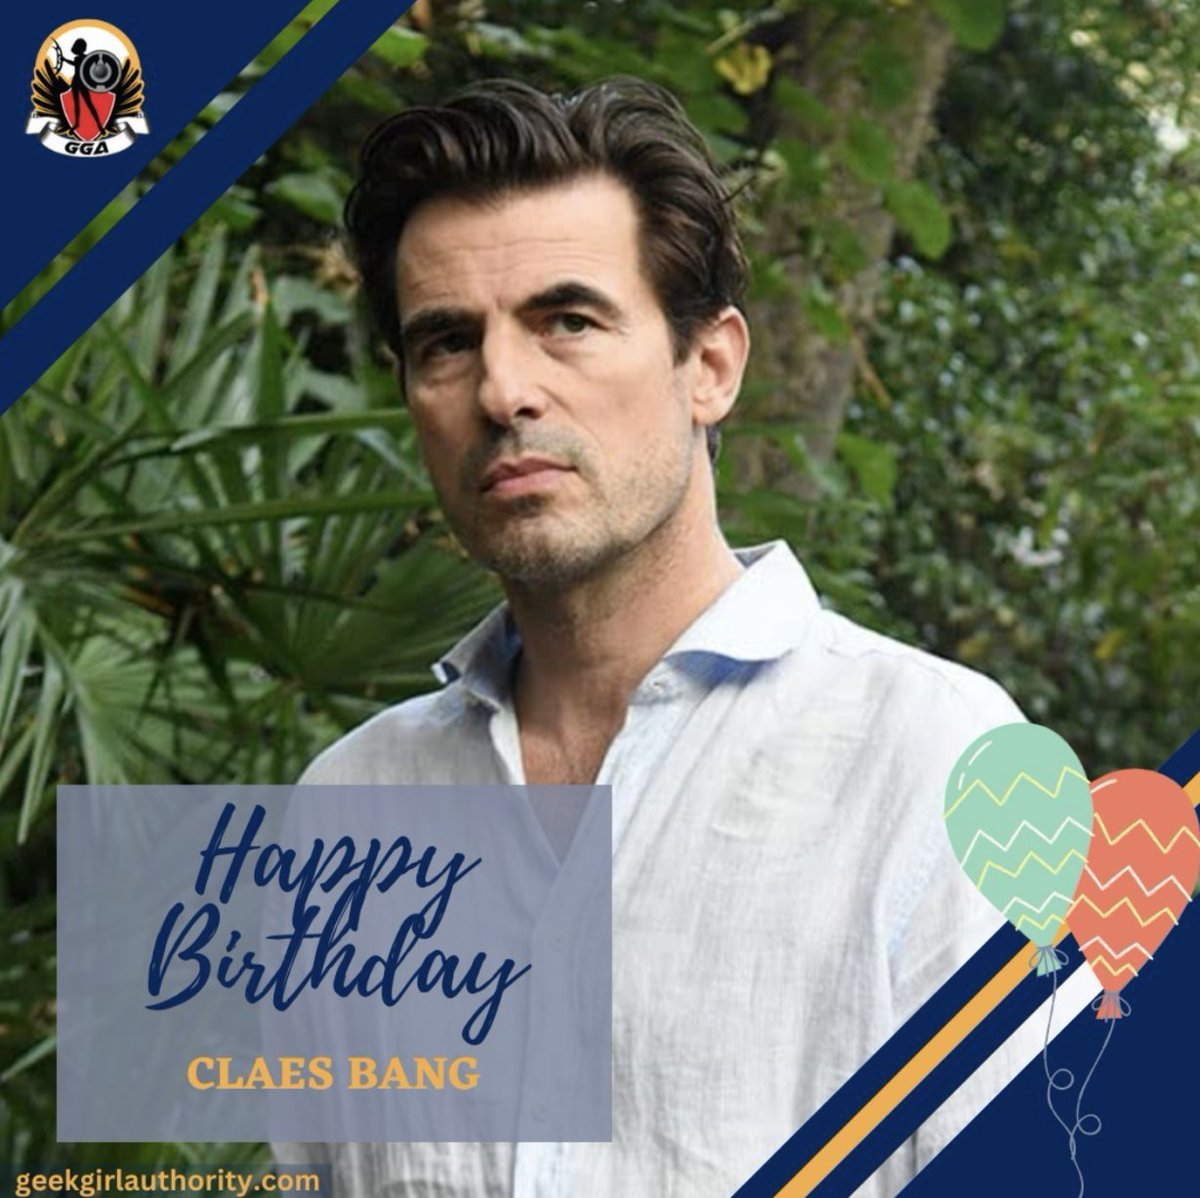 Happy Birthday, Claes Bang! Which one of his roles is your favorite?

#BadSisters #TheNewLook #Dracula